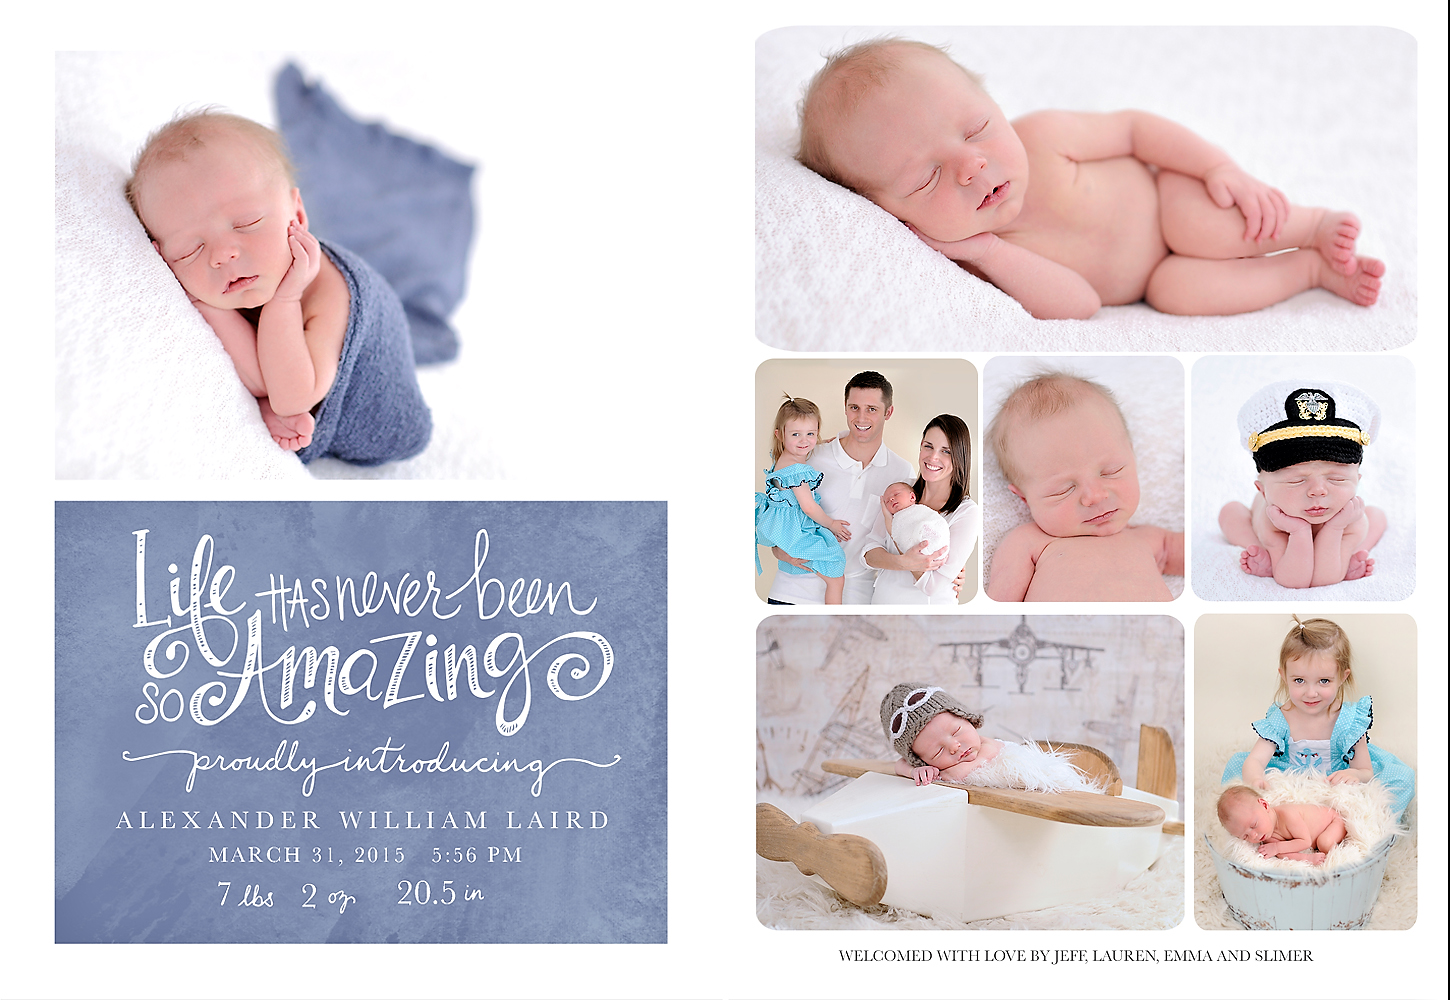 Each and every DWP client receives a custom set of newborn announcements as a special gift!